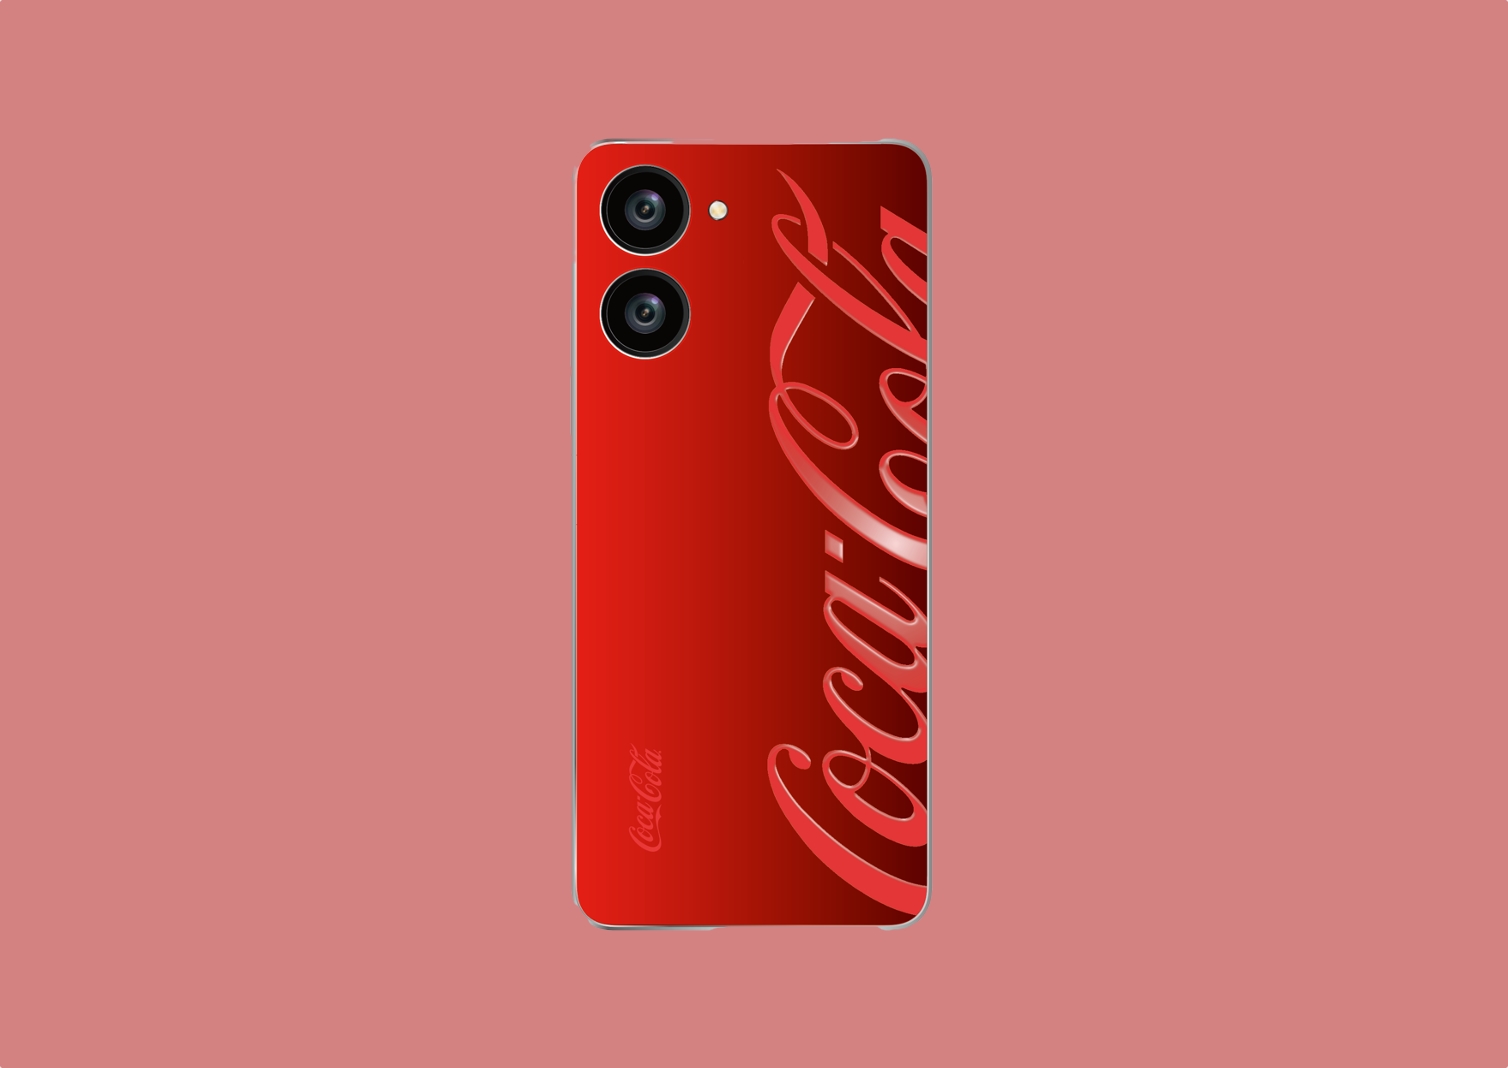 Coca-Cola plans to announce a branded smartphone: here's how the novelty will look